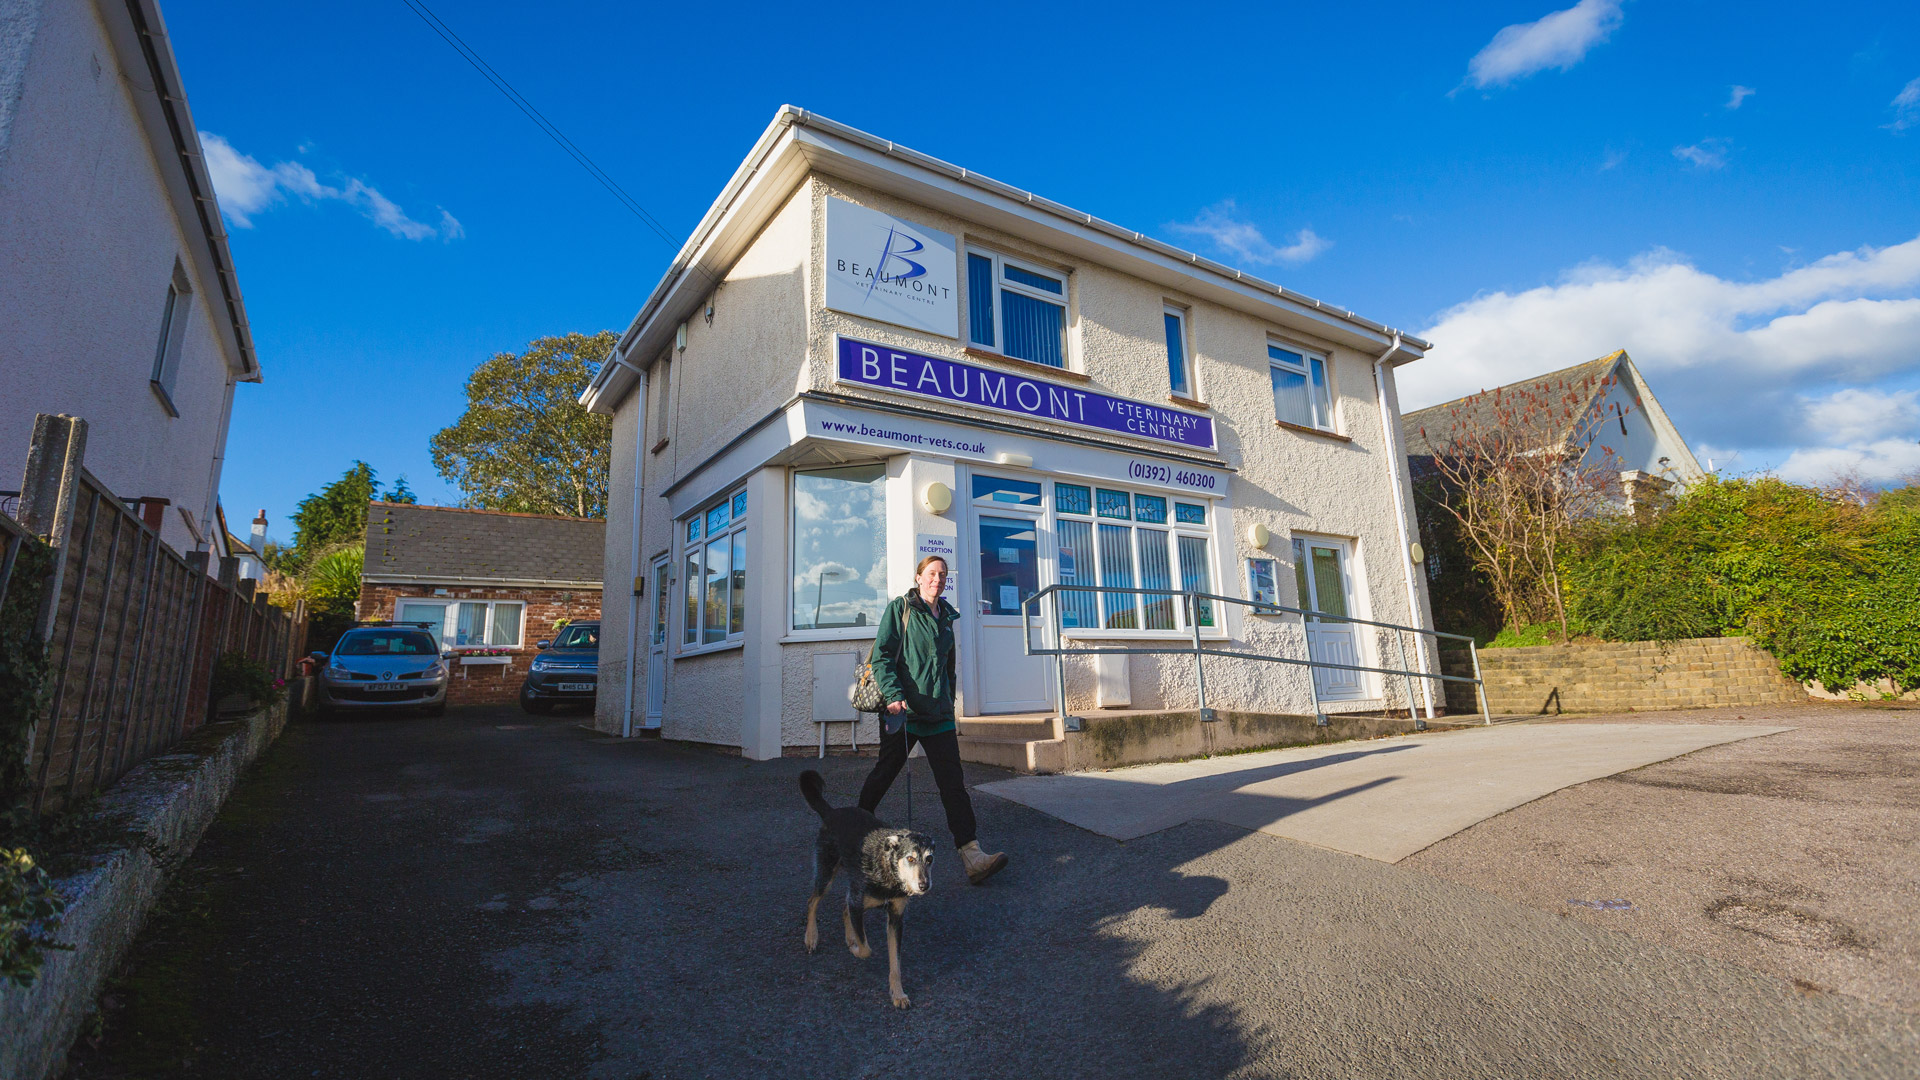 Vets in Pinhoe | Affordable Exeter Vets - Beaumont Vets